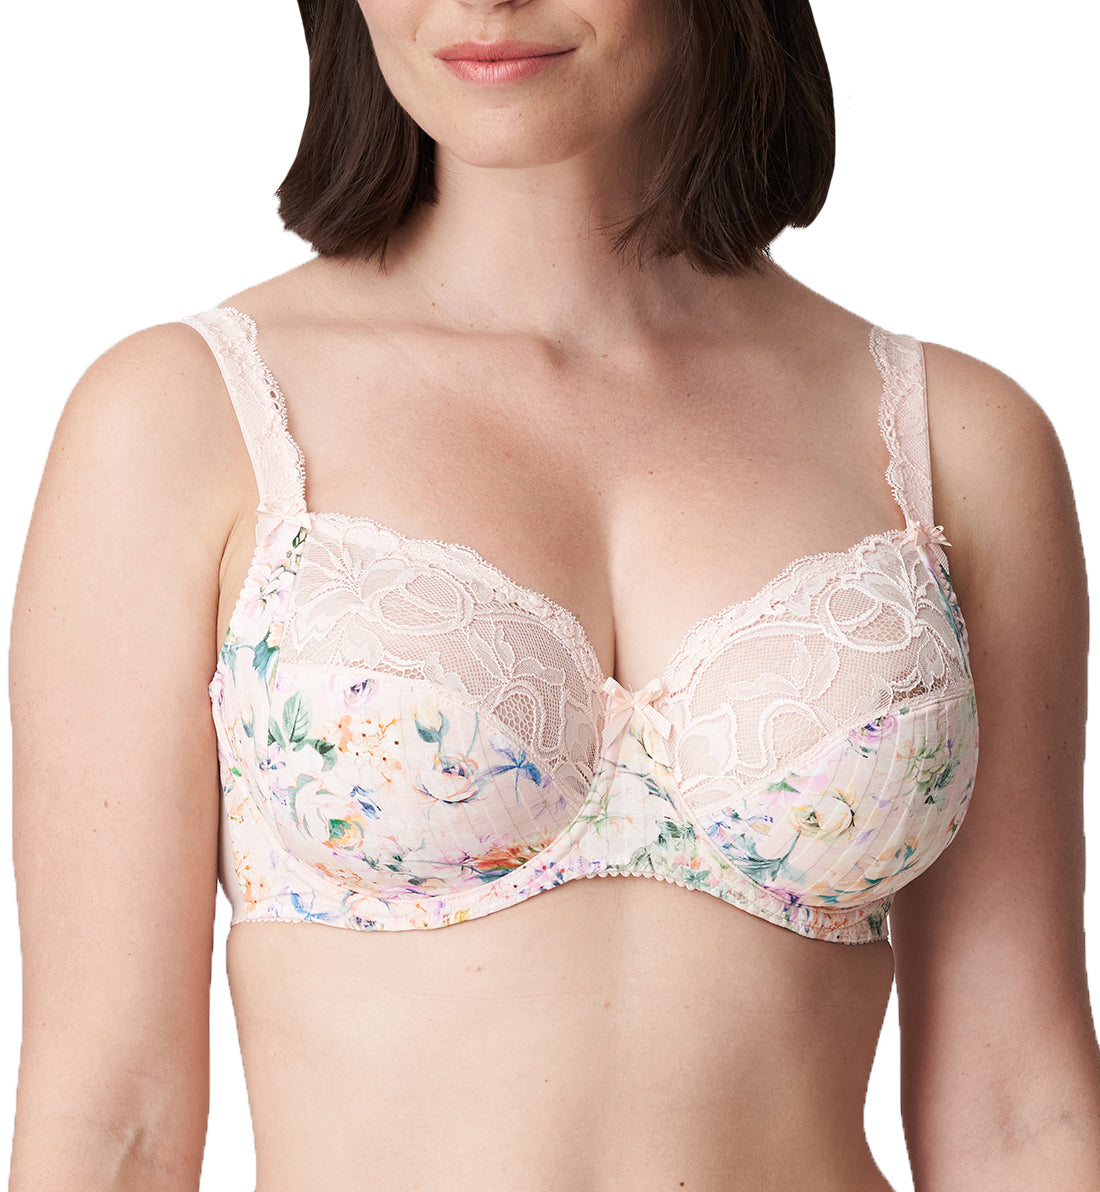 Bra Top „MADISON“ LOW SUPPORT (Pink)